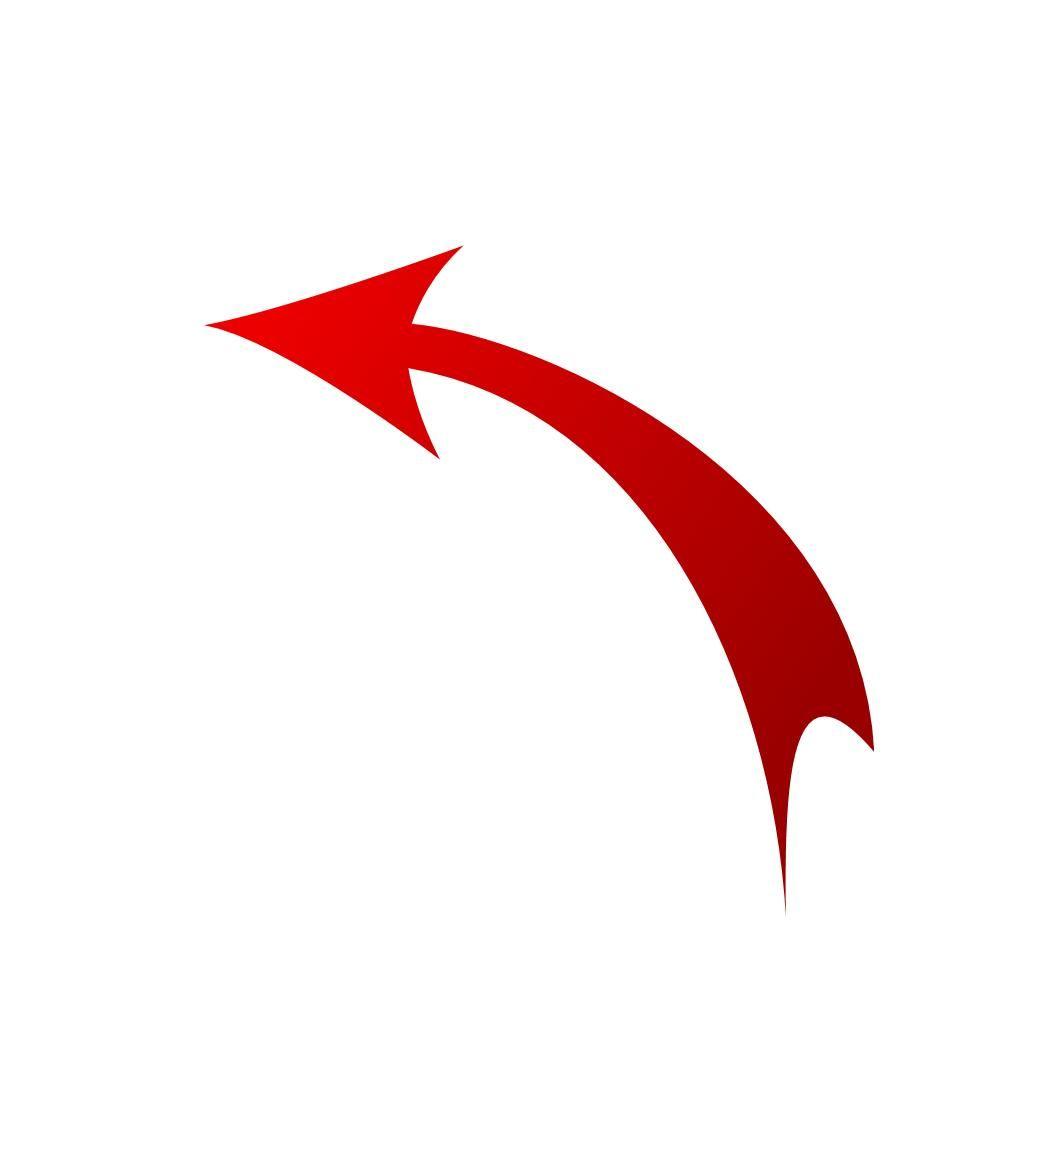 Red Arrow Logo - Free Red Arrow Image, Download Free Clip Art, Free Clip Art on ...